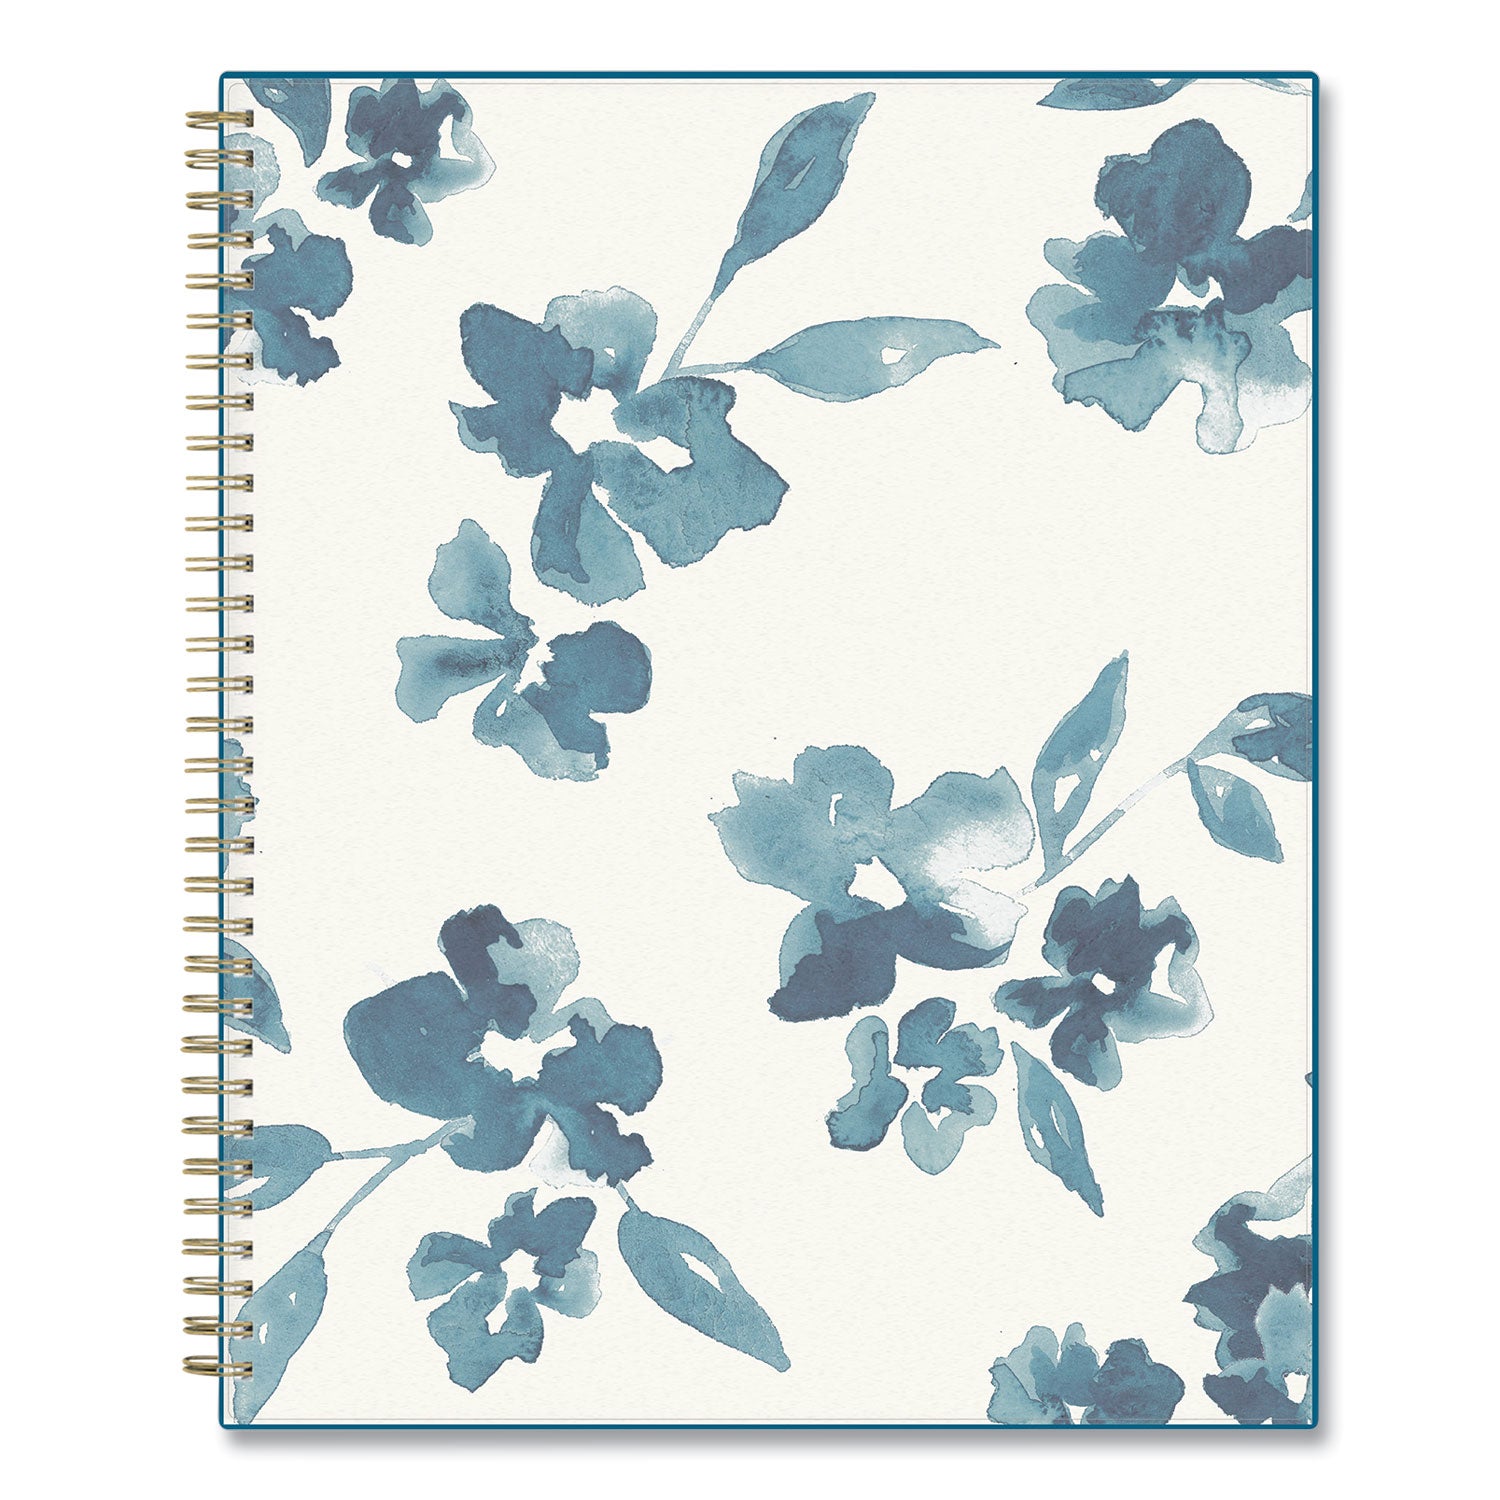 bakah-blue-academic-year-weekly-monthly-planner-floral-artwork-11-x-85-blue-white-cover-12-month-july-june-2023-2024_bls131951 - 4